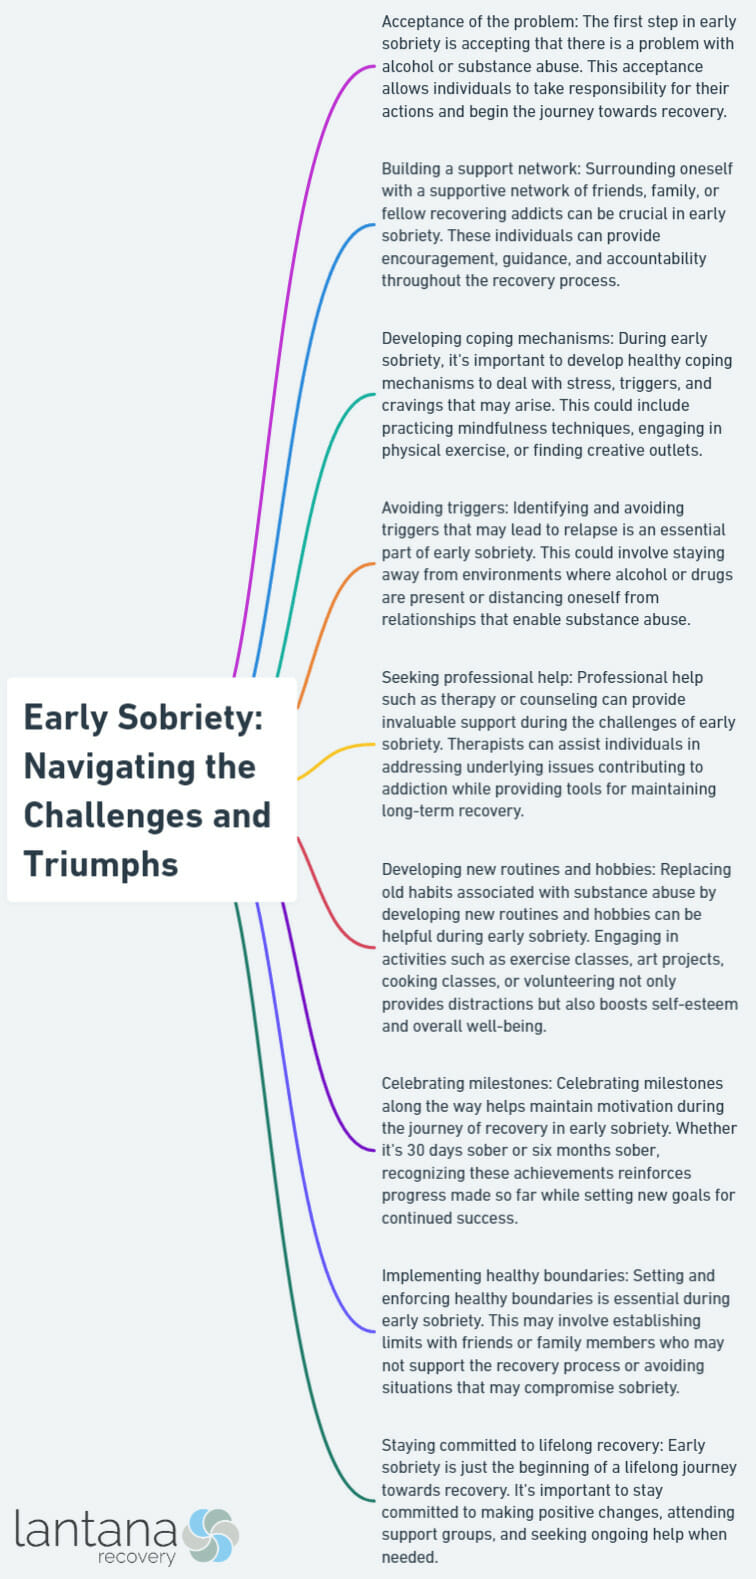 Early Sobriety: Navigating the Challenges and Triumphs